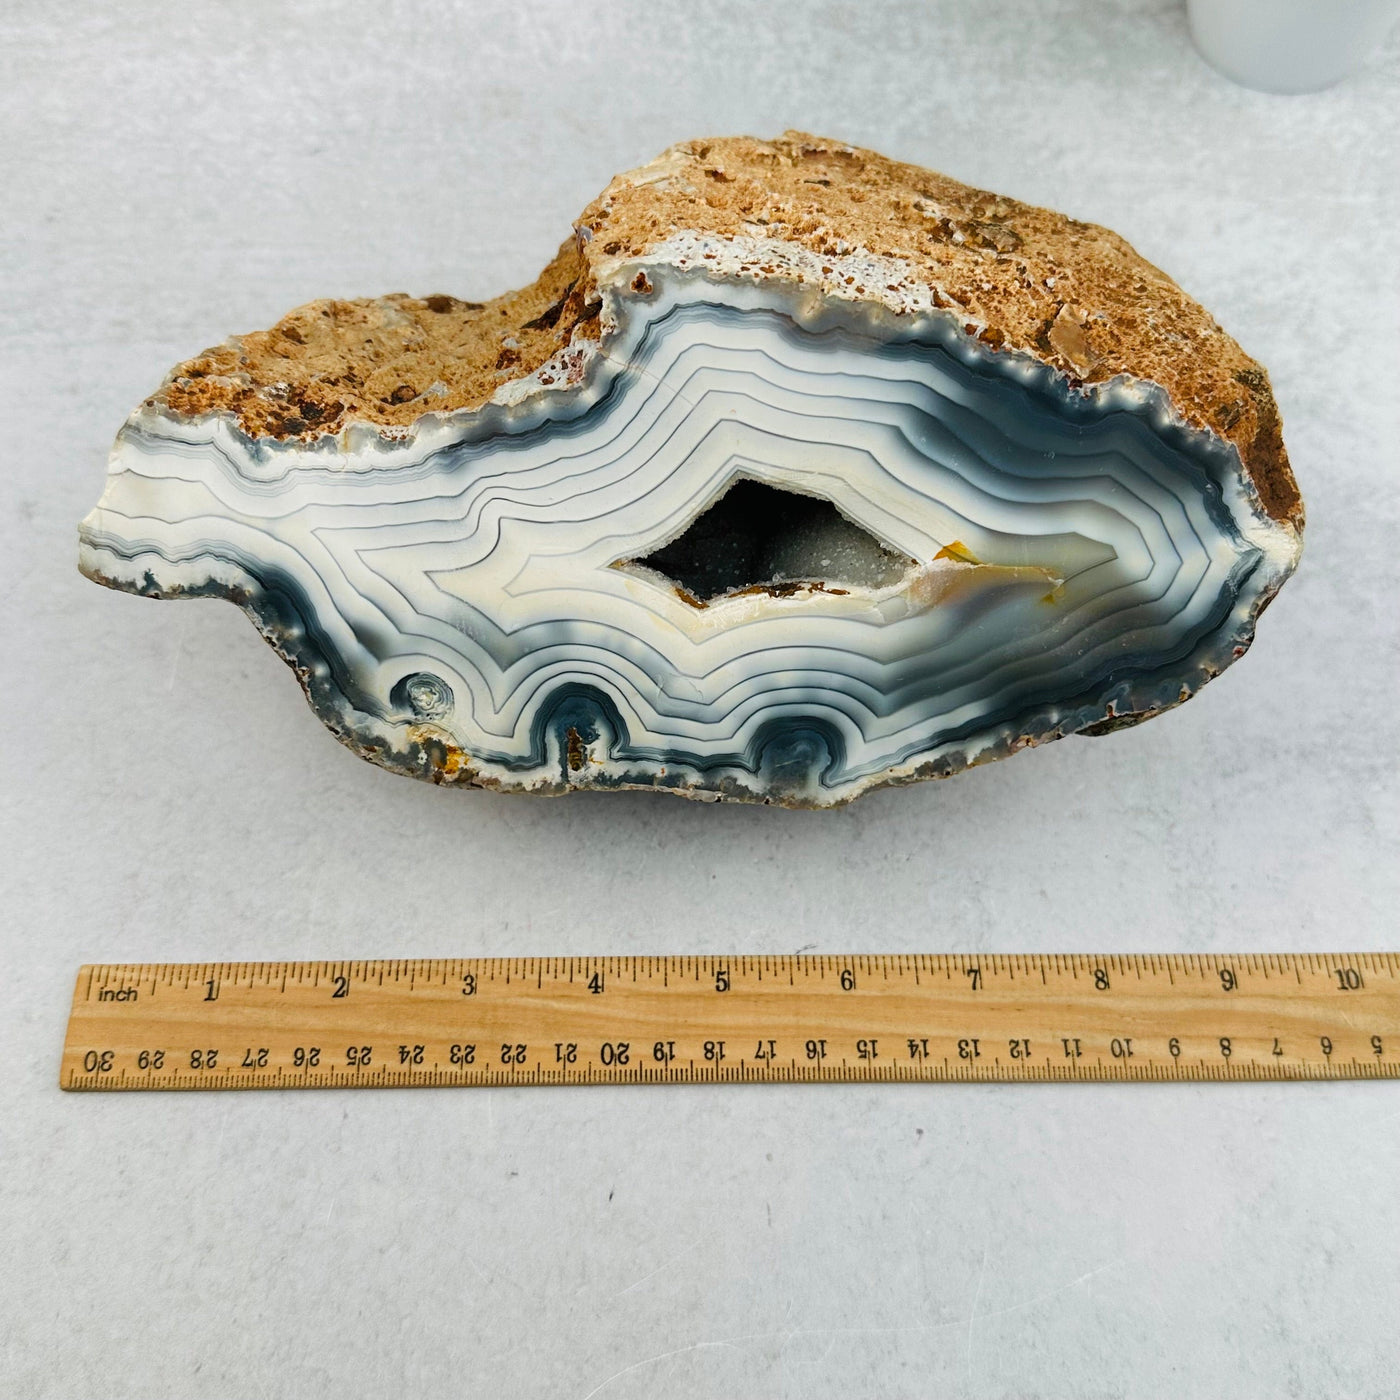 Agate Geode with White Banding next to a ruler for size reference 